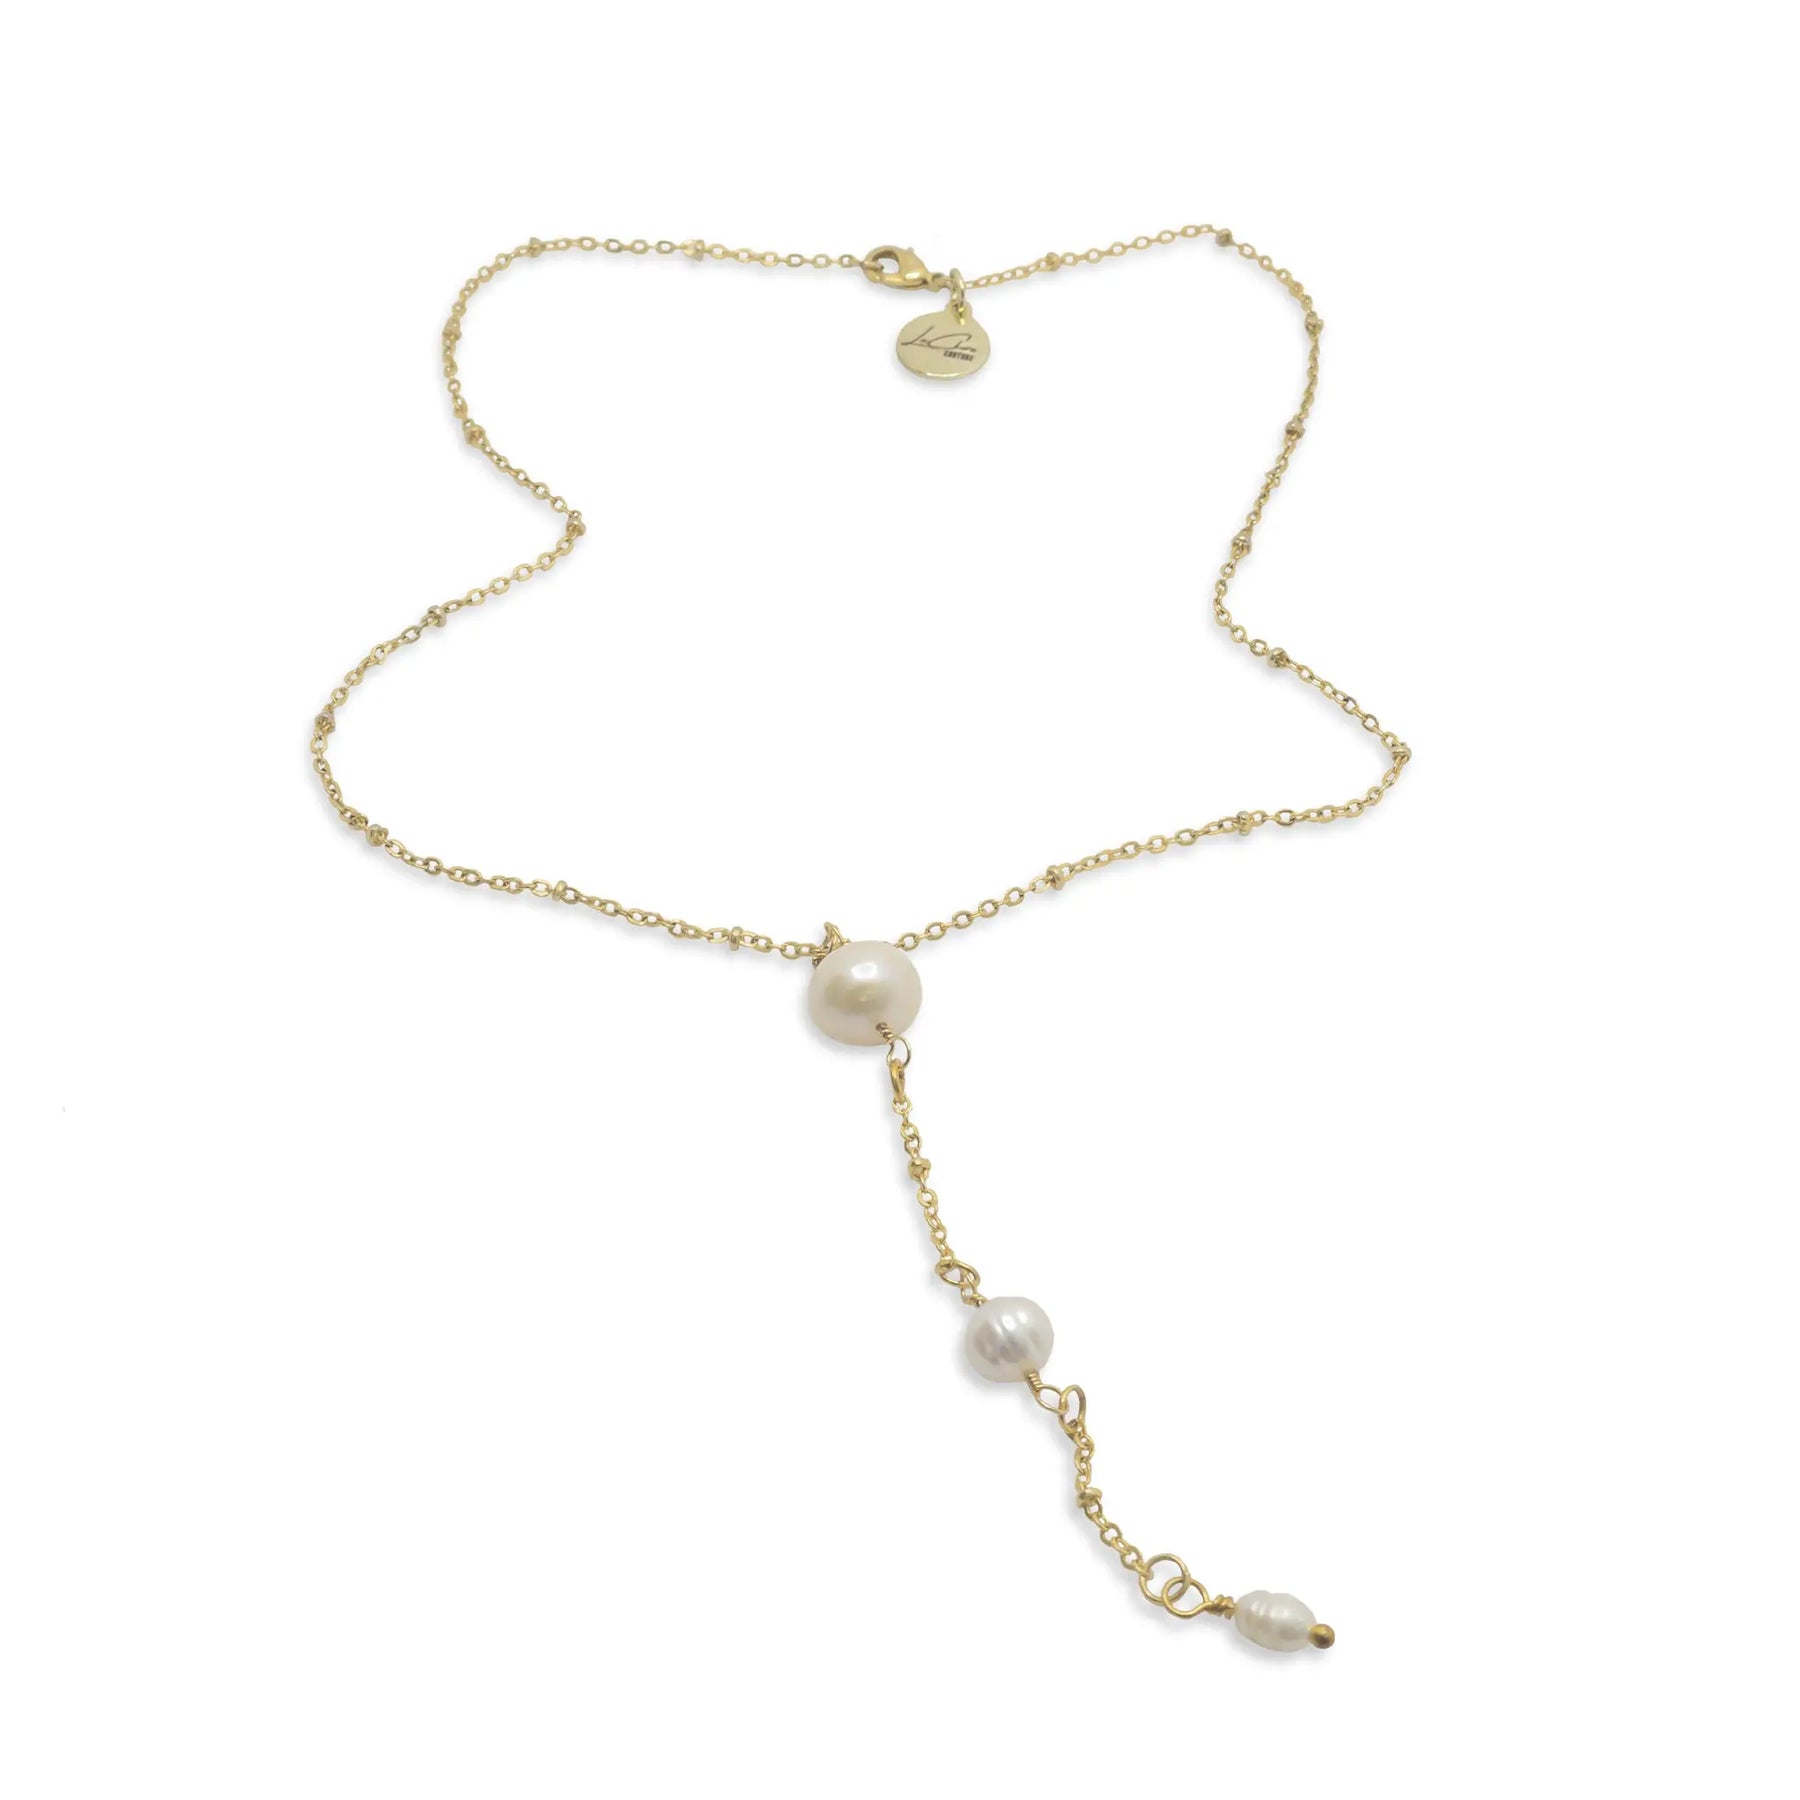 A gold chain with three pearls